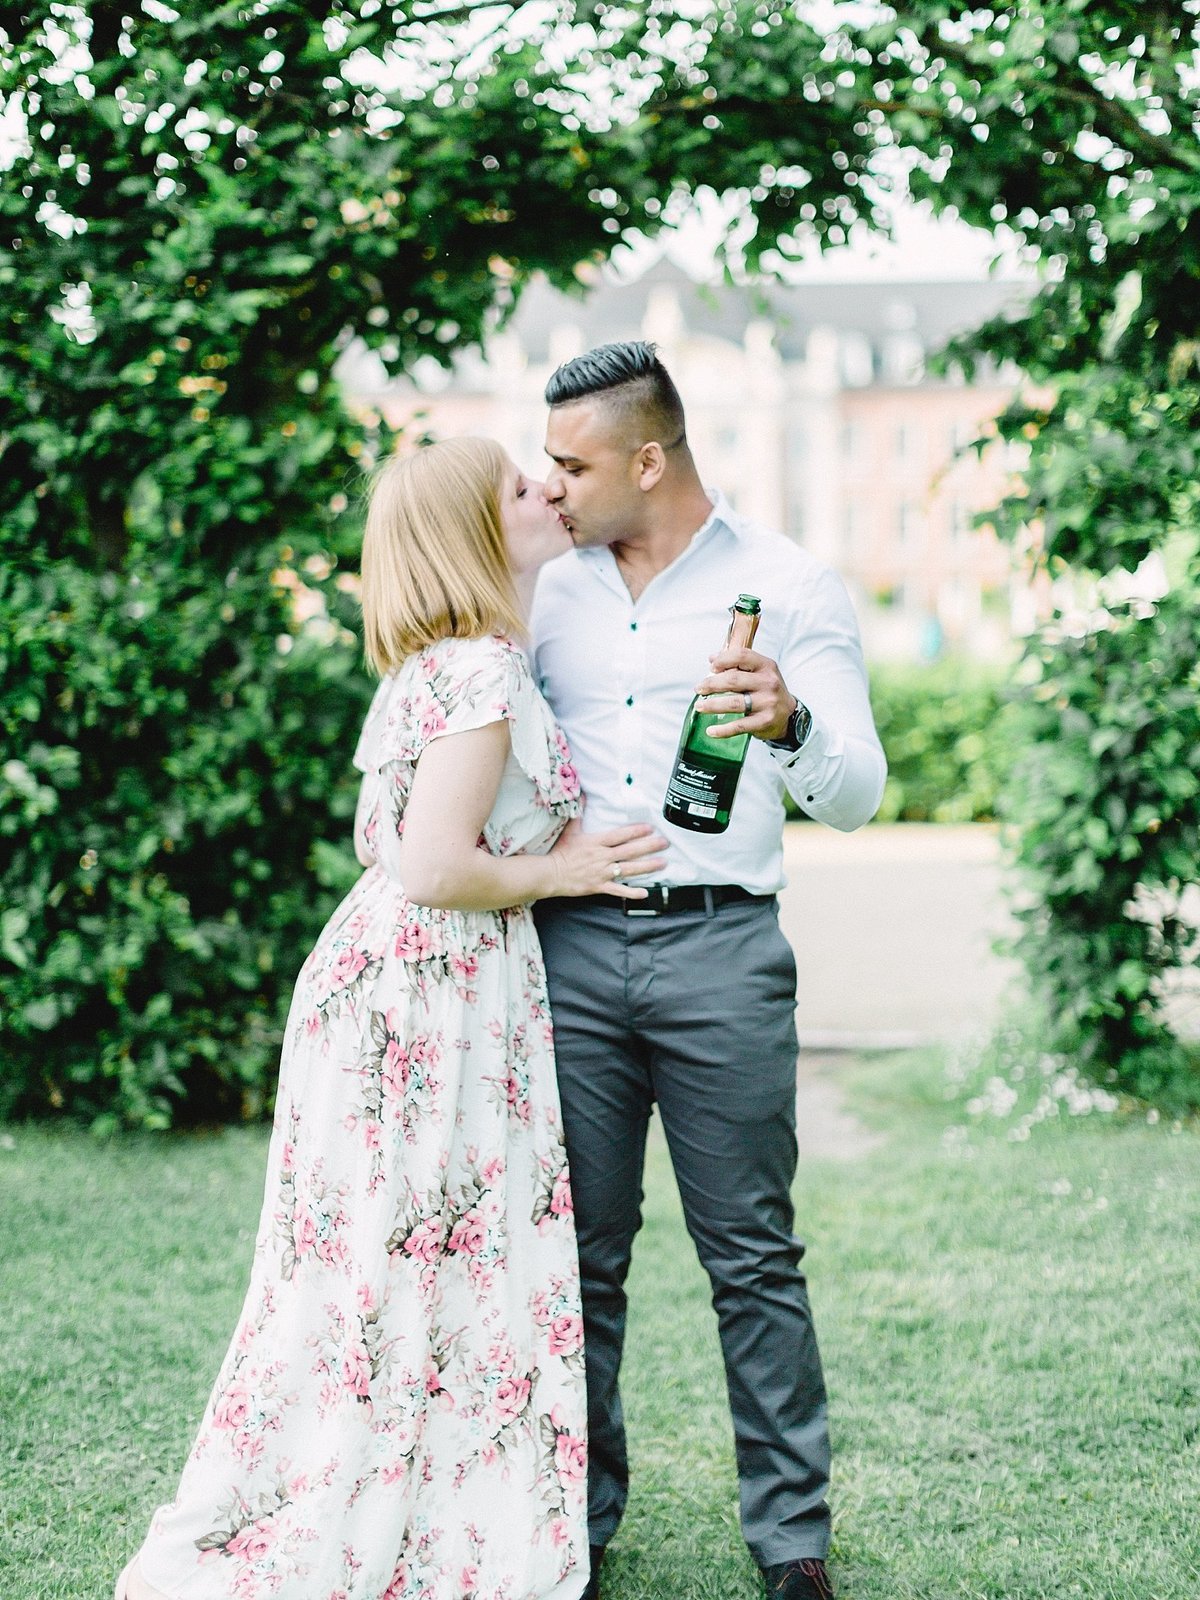 Champagne toast at Romantic European Palace Anniversary Session photographed by France destination wedding photographer Alicia Yarrish Photography